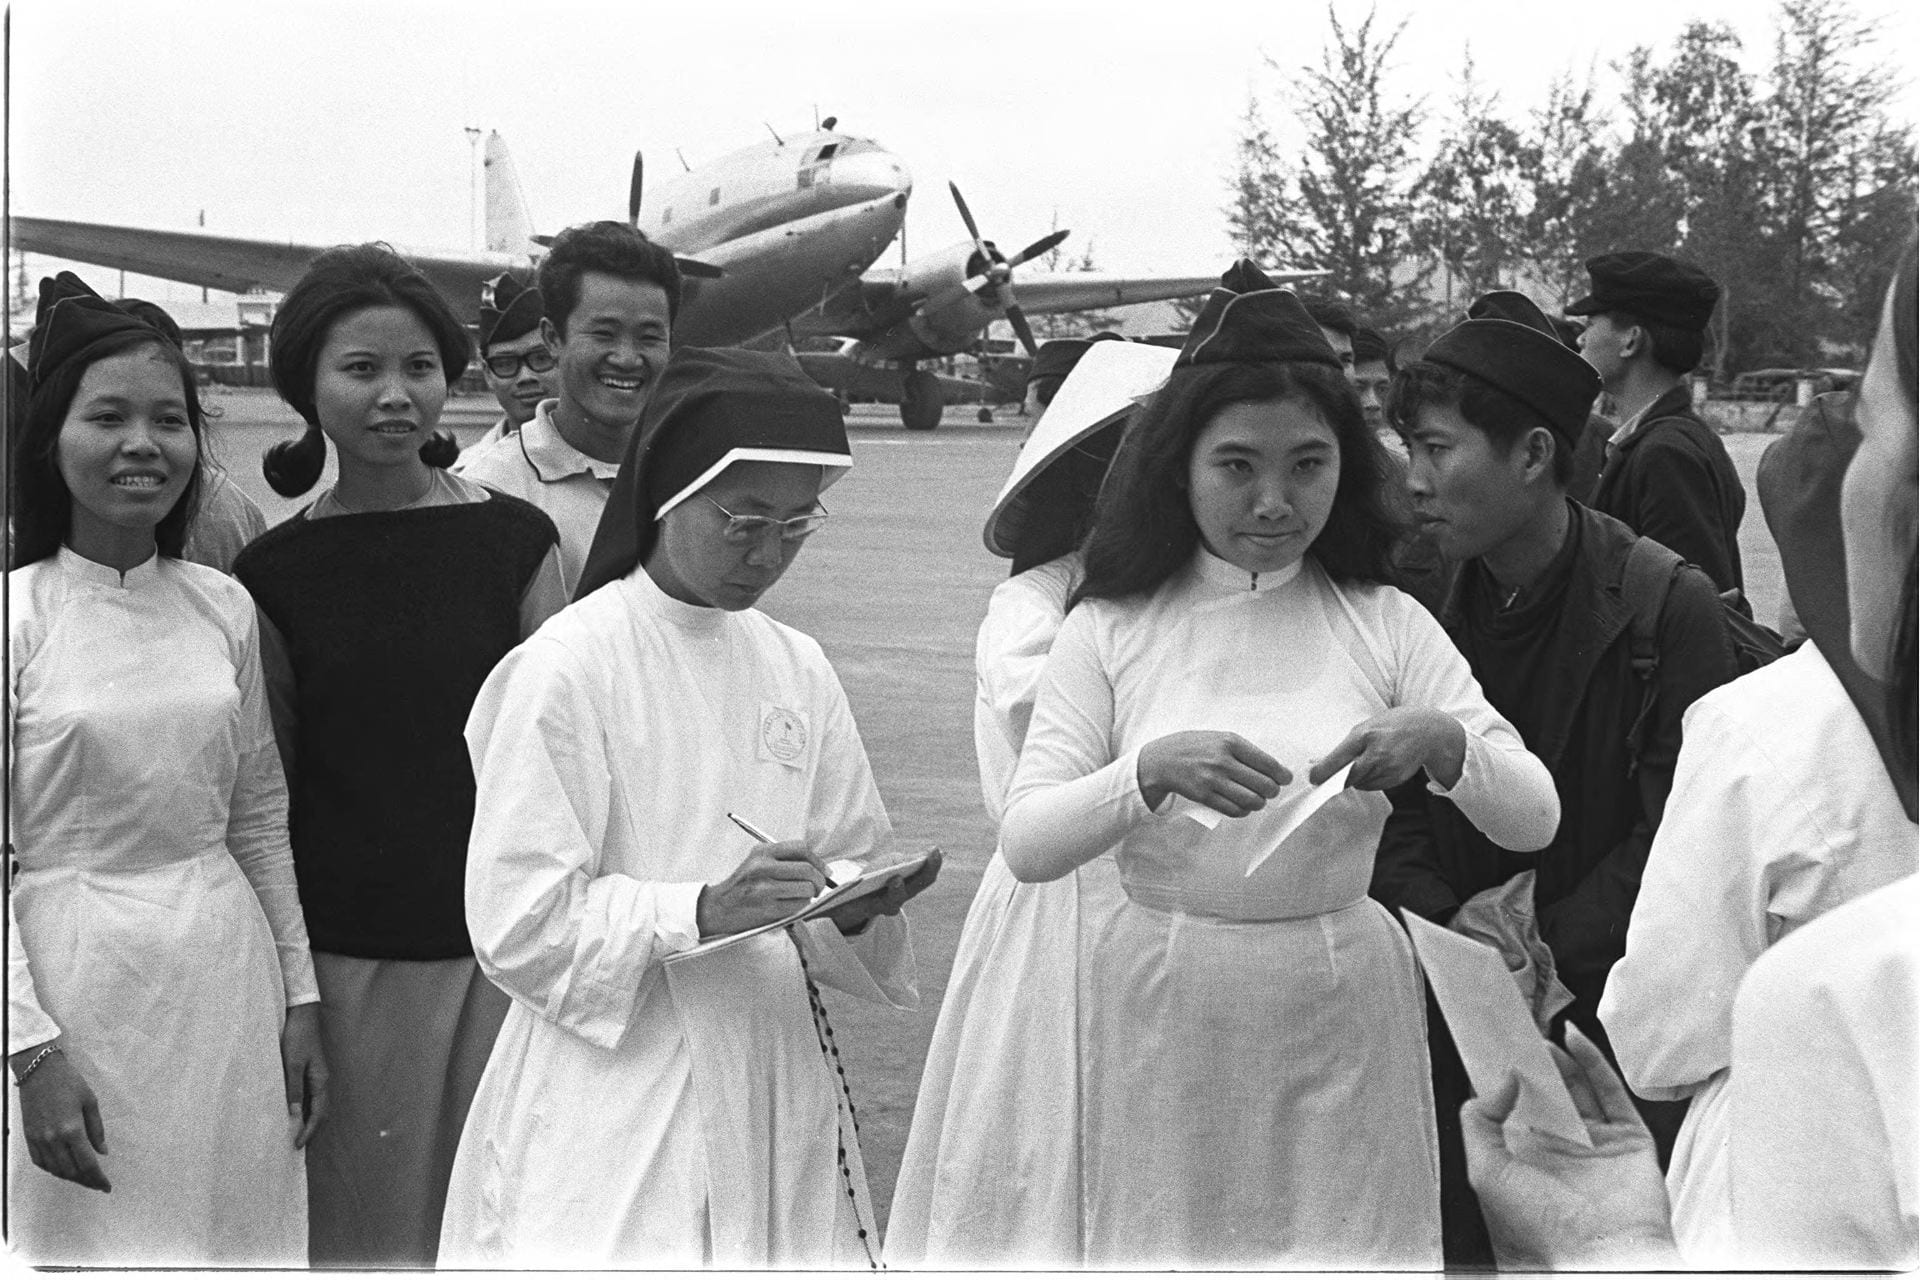 Black-and-white photo of several people standing outside with an airplane in the background